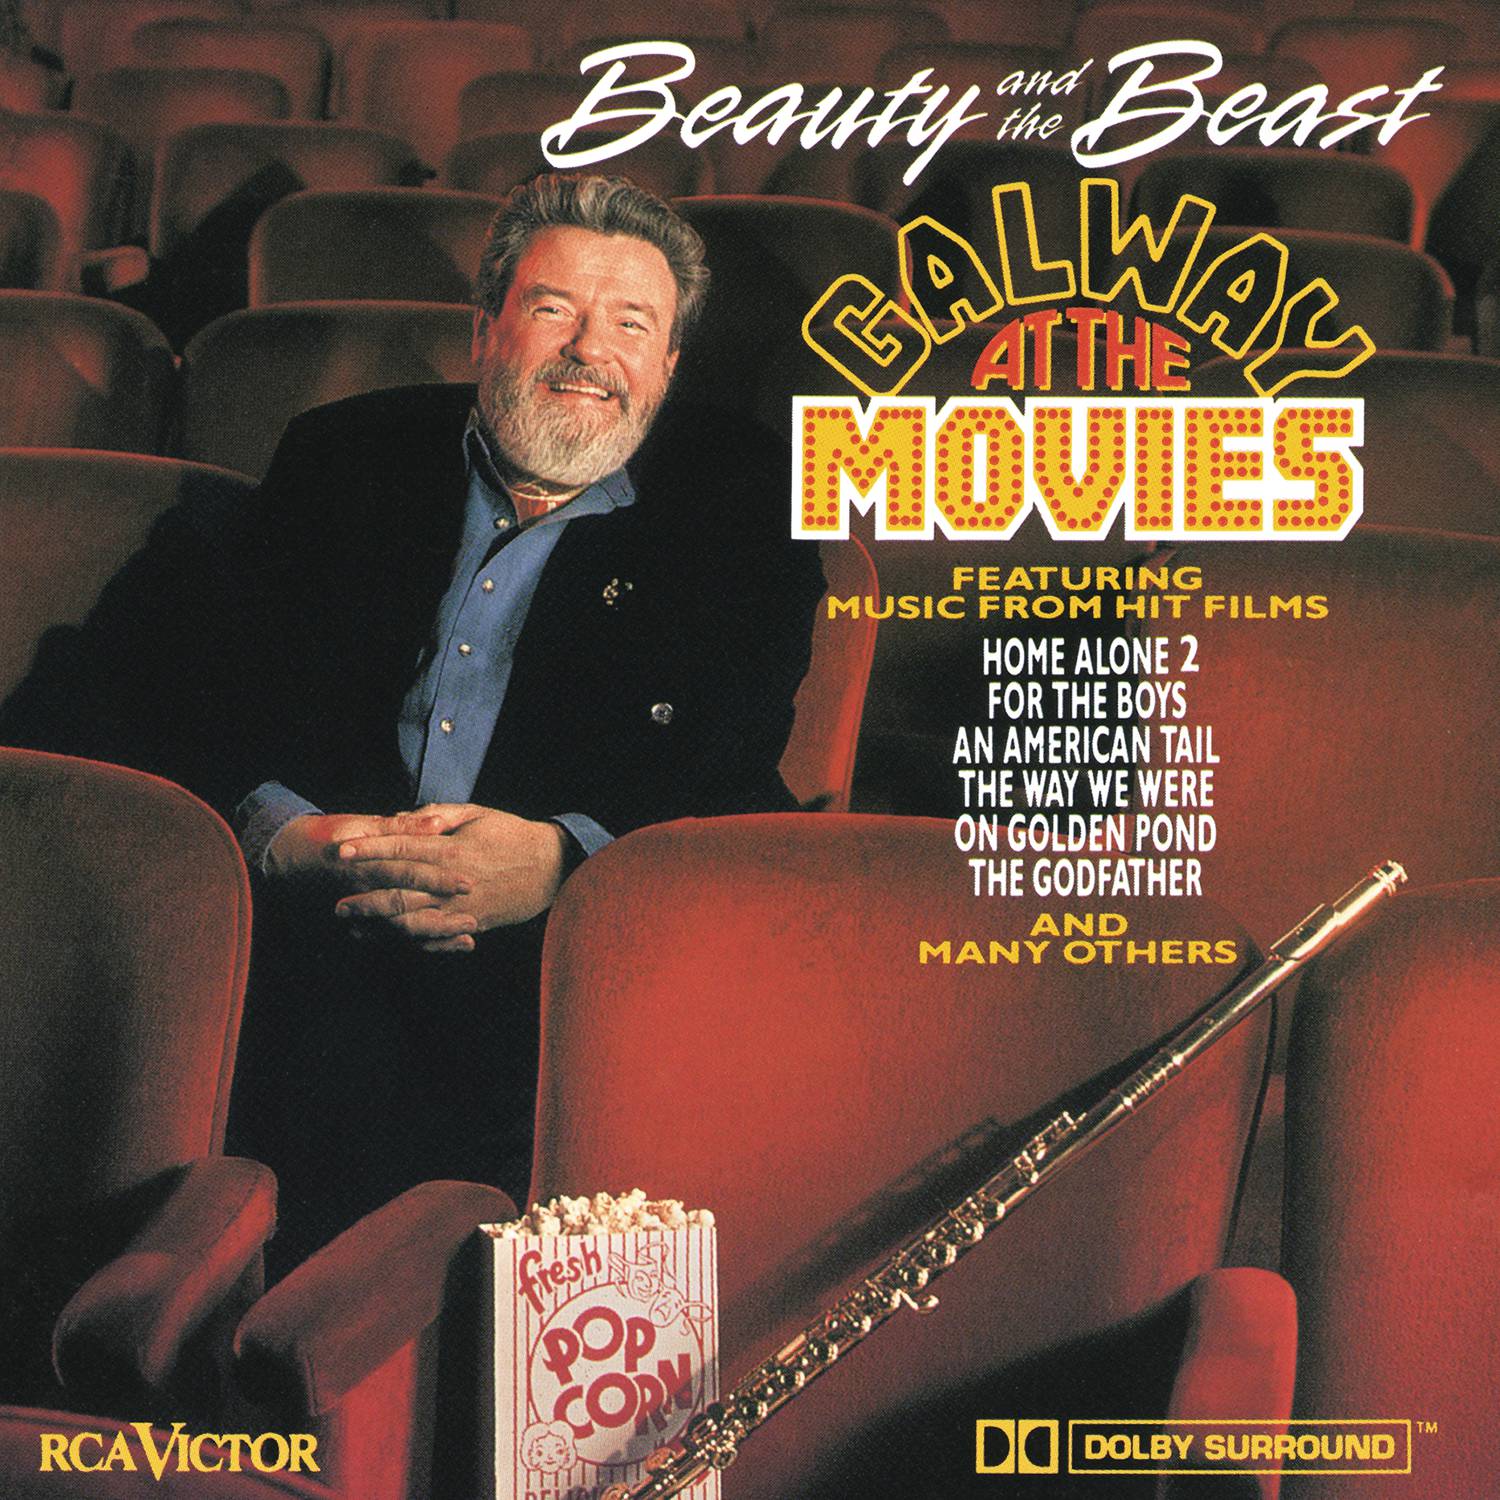 James Galway at the Movies